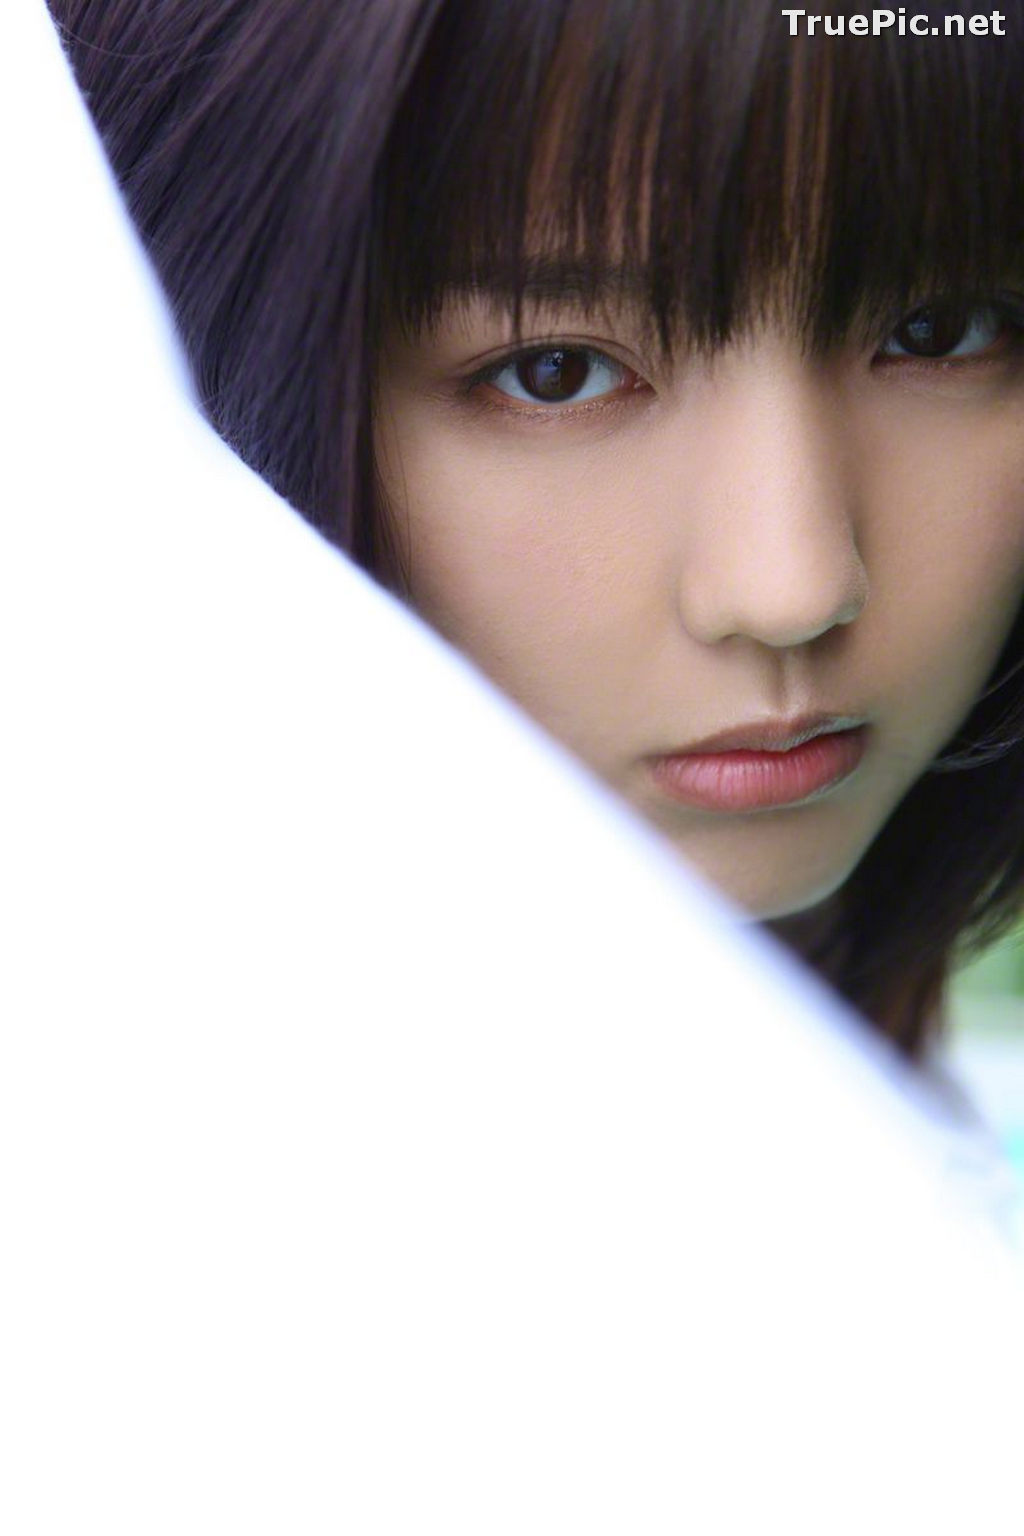 Image [WBGC Photograph] No.131 - Japanese Singer and Actress - Erina Mano - TruePic.net - Picture-25